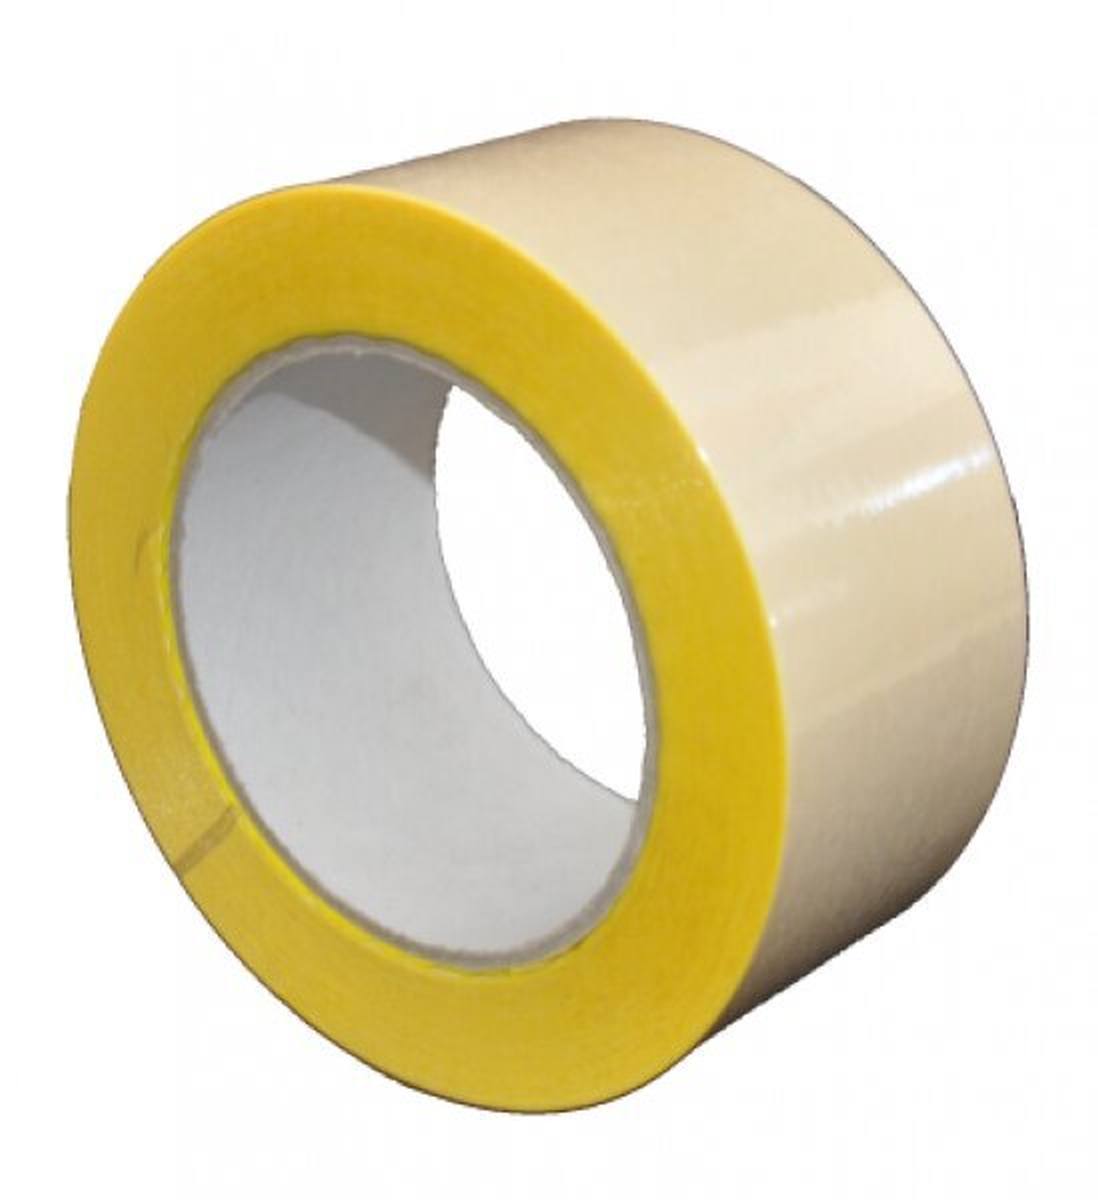 S-K-S 407 Double-sided adhesive tape with polypropylene backing, high / low tack, yellow, 350 mm x 50 m, 0.15 mm